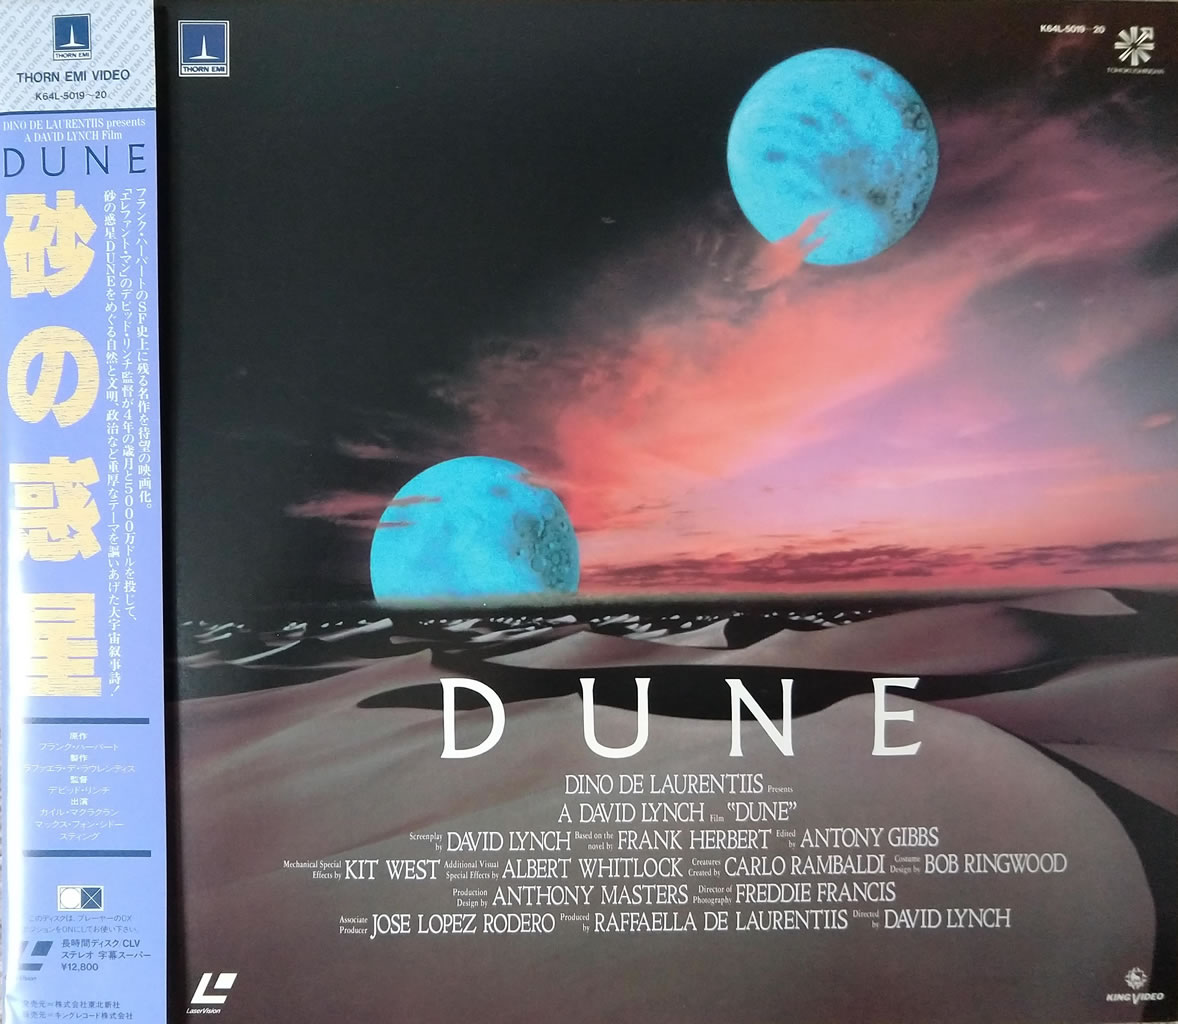 Front cover of David Lynch's 'Dune' movie LaserDisc release, Japanese edition from 1985.